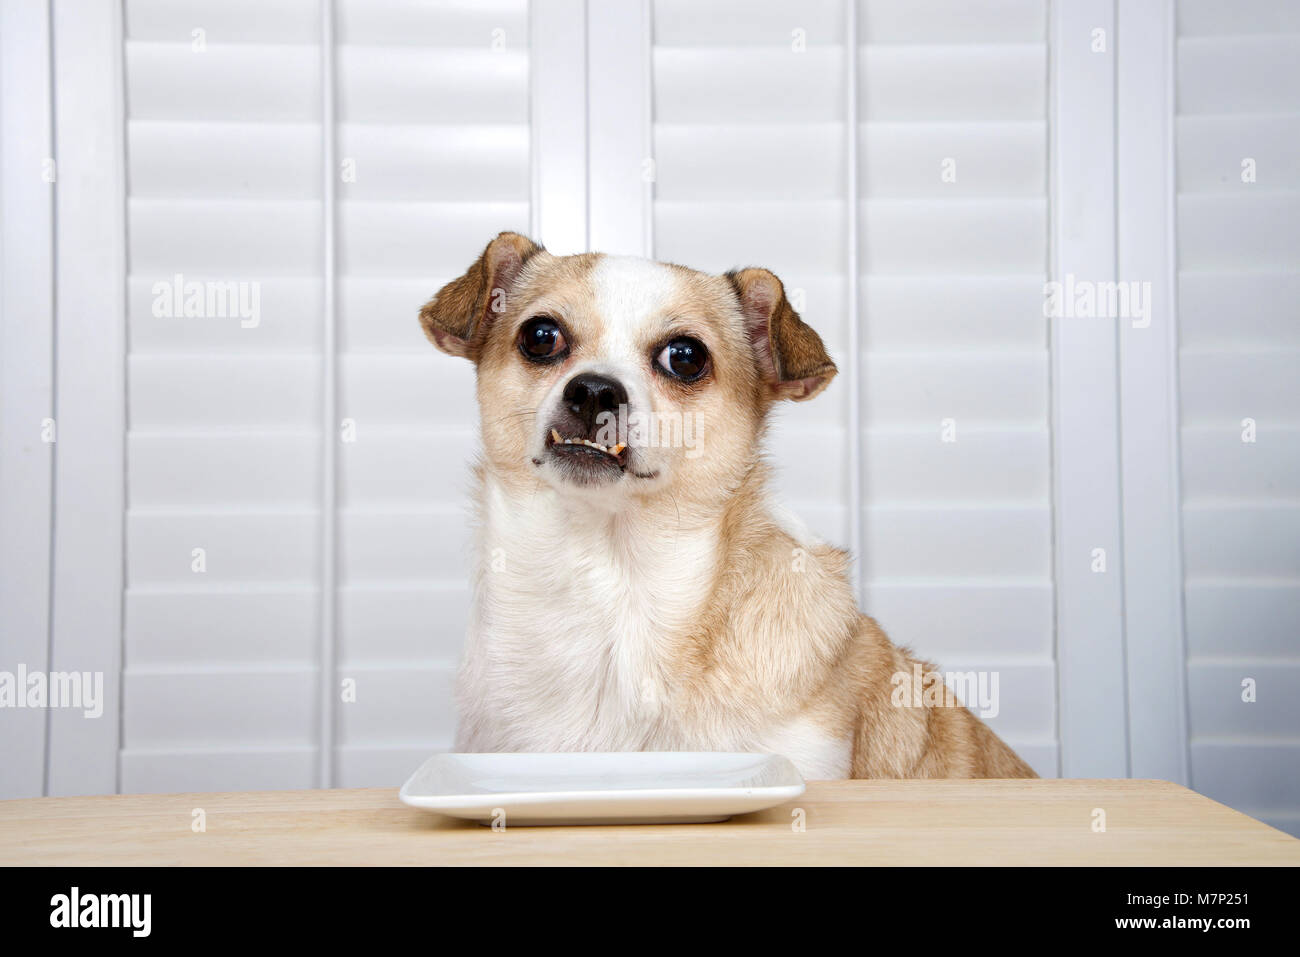 One senior chihuahua dog sitting at kitchen table waiting for food. Square white plate empty. Window background with shutters. Stock Photo